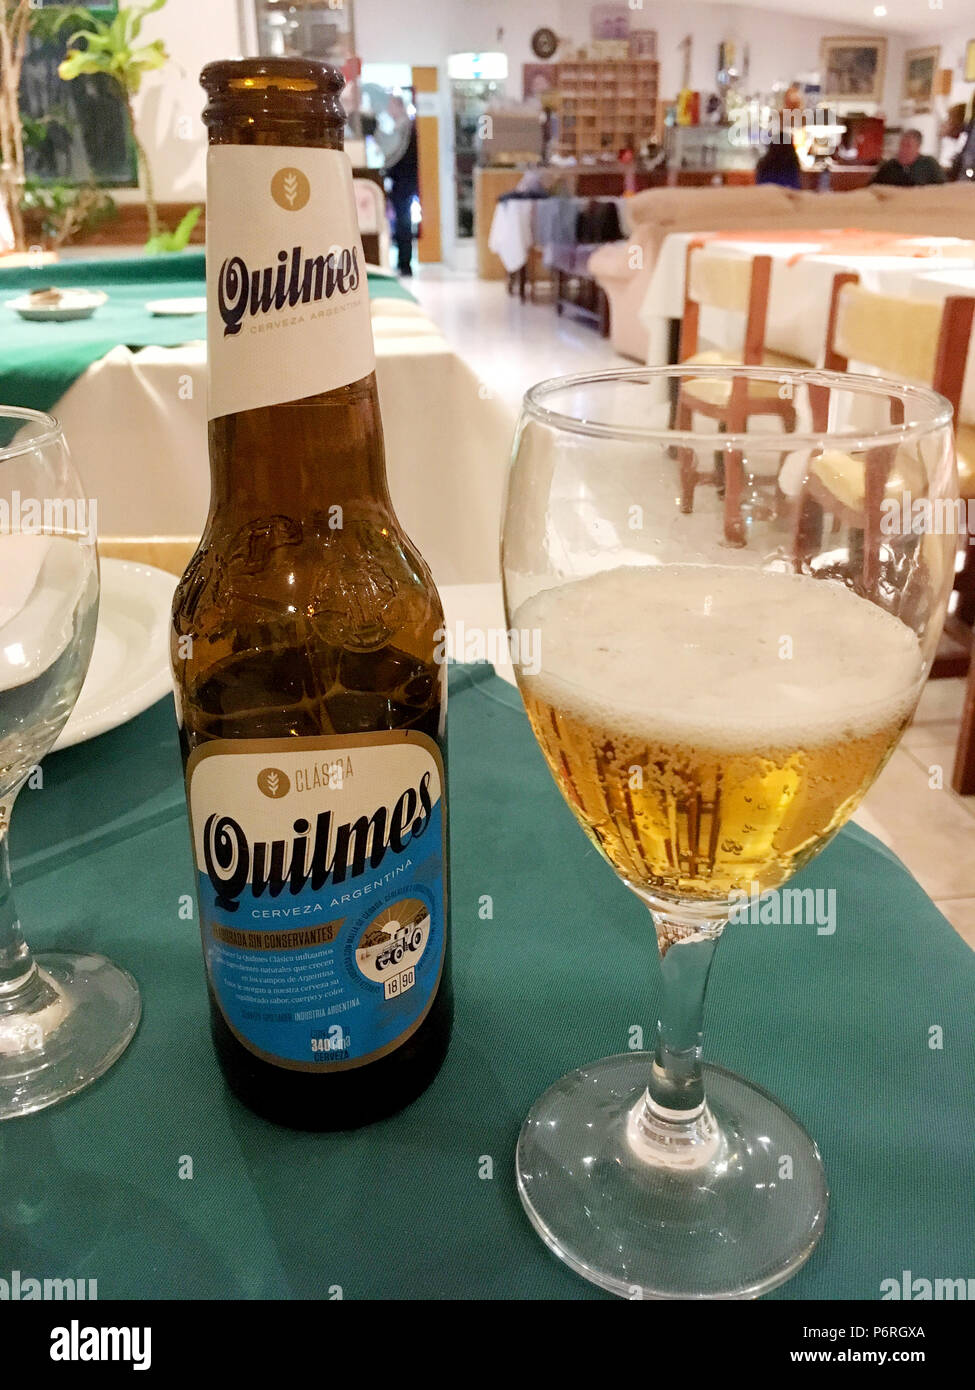 Quilmes beer, from Argentina. Stock Photo